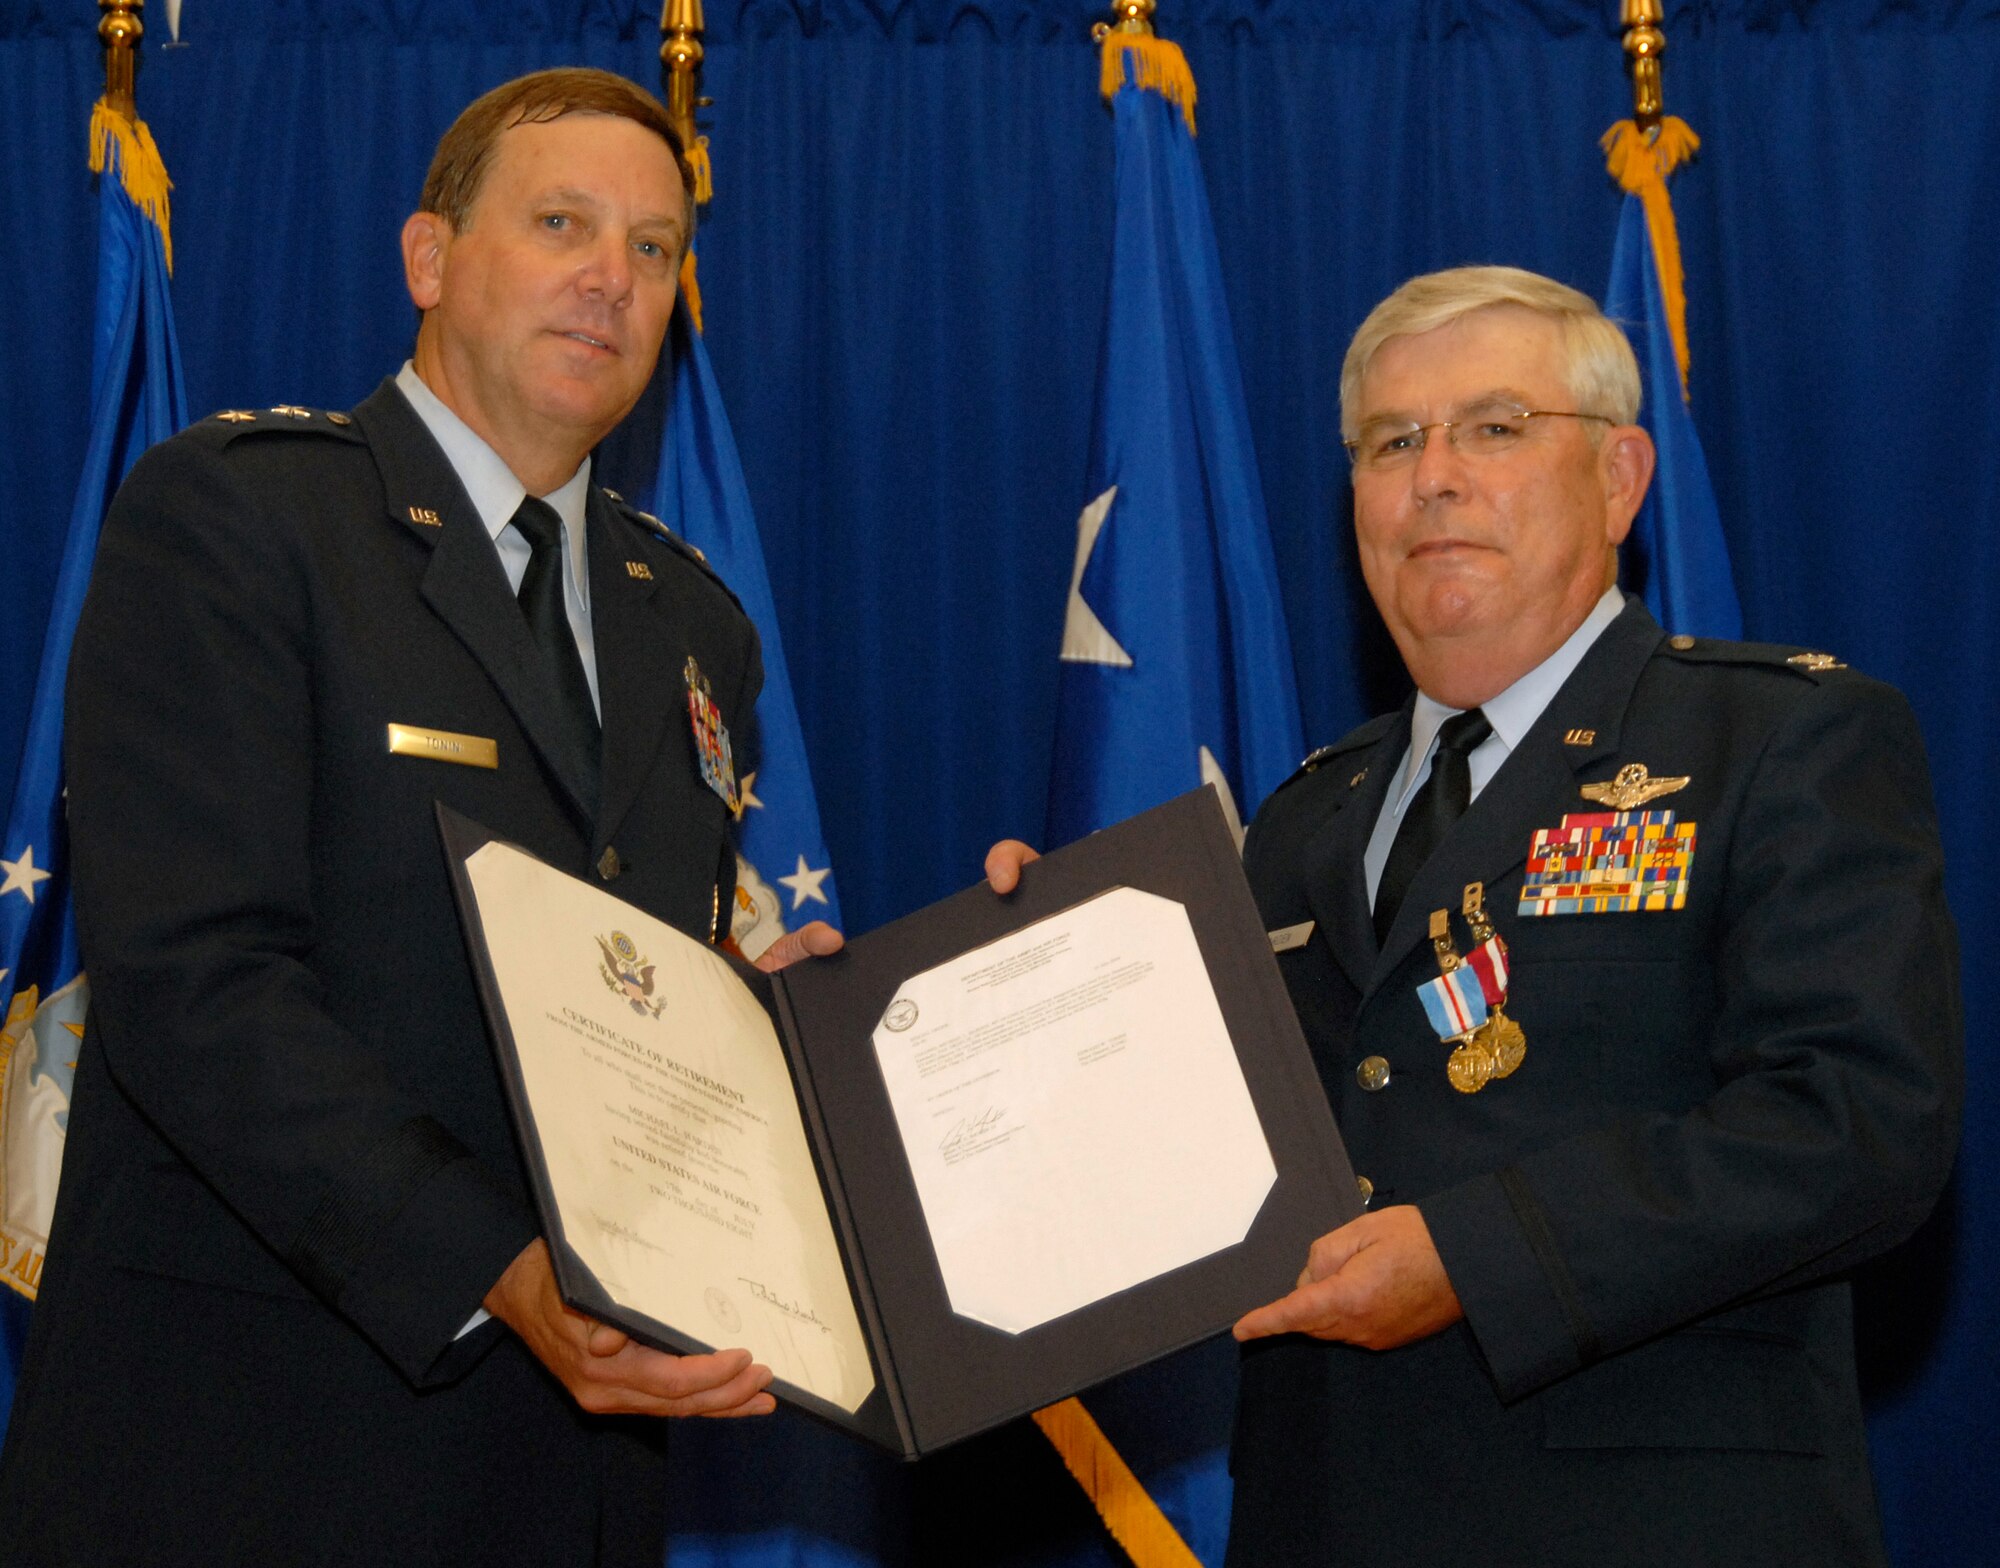 Kentucky’s adjutant general, Maj. Gen. Edward Tonini, presents Col. Michael Harden with a certificate of retirement during a ceremony held on base Aug. 10. Colonel Harden, a former wing commander, also received a Meritorious Service Medal and the Kentucky Distinguished Service Medal at the ceremony. (Photo by Tech. Sgt. Dennis Flora/KyANG)